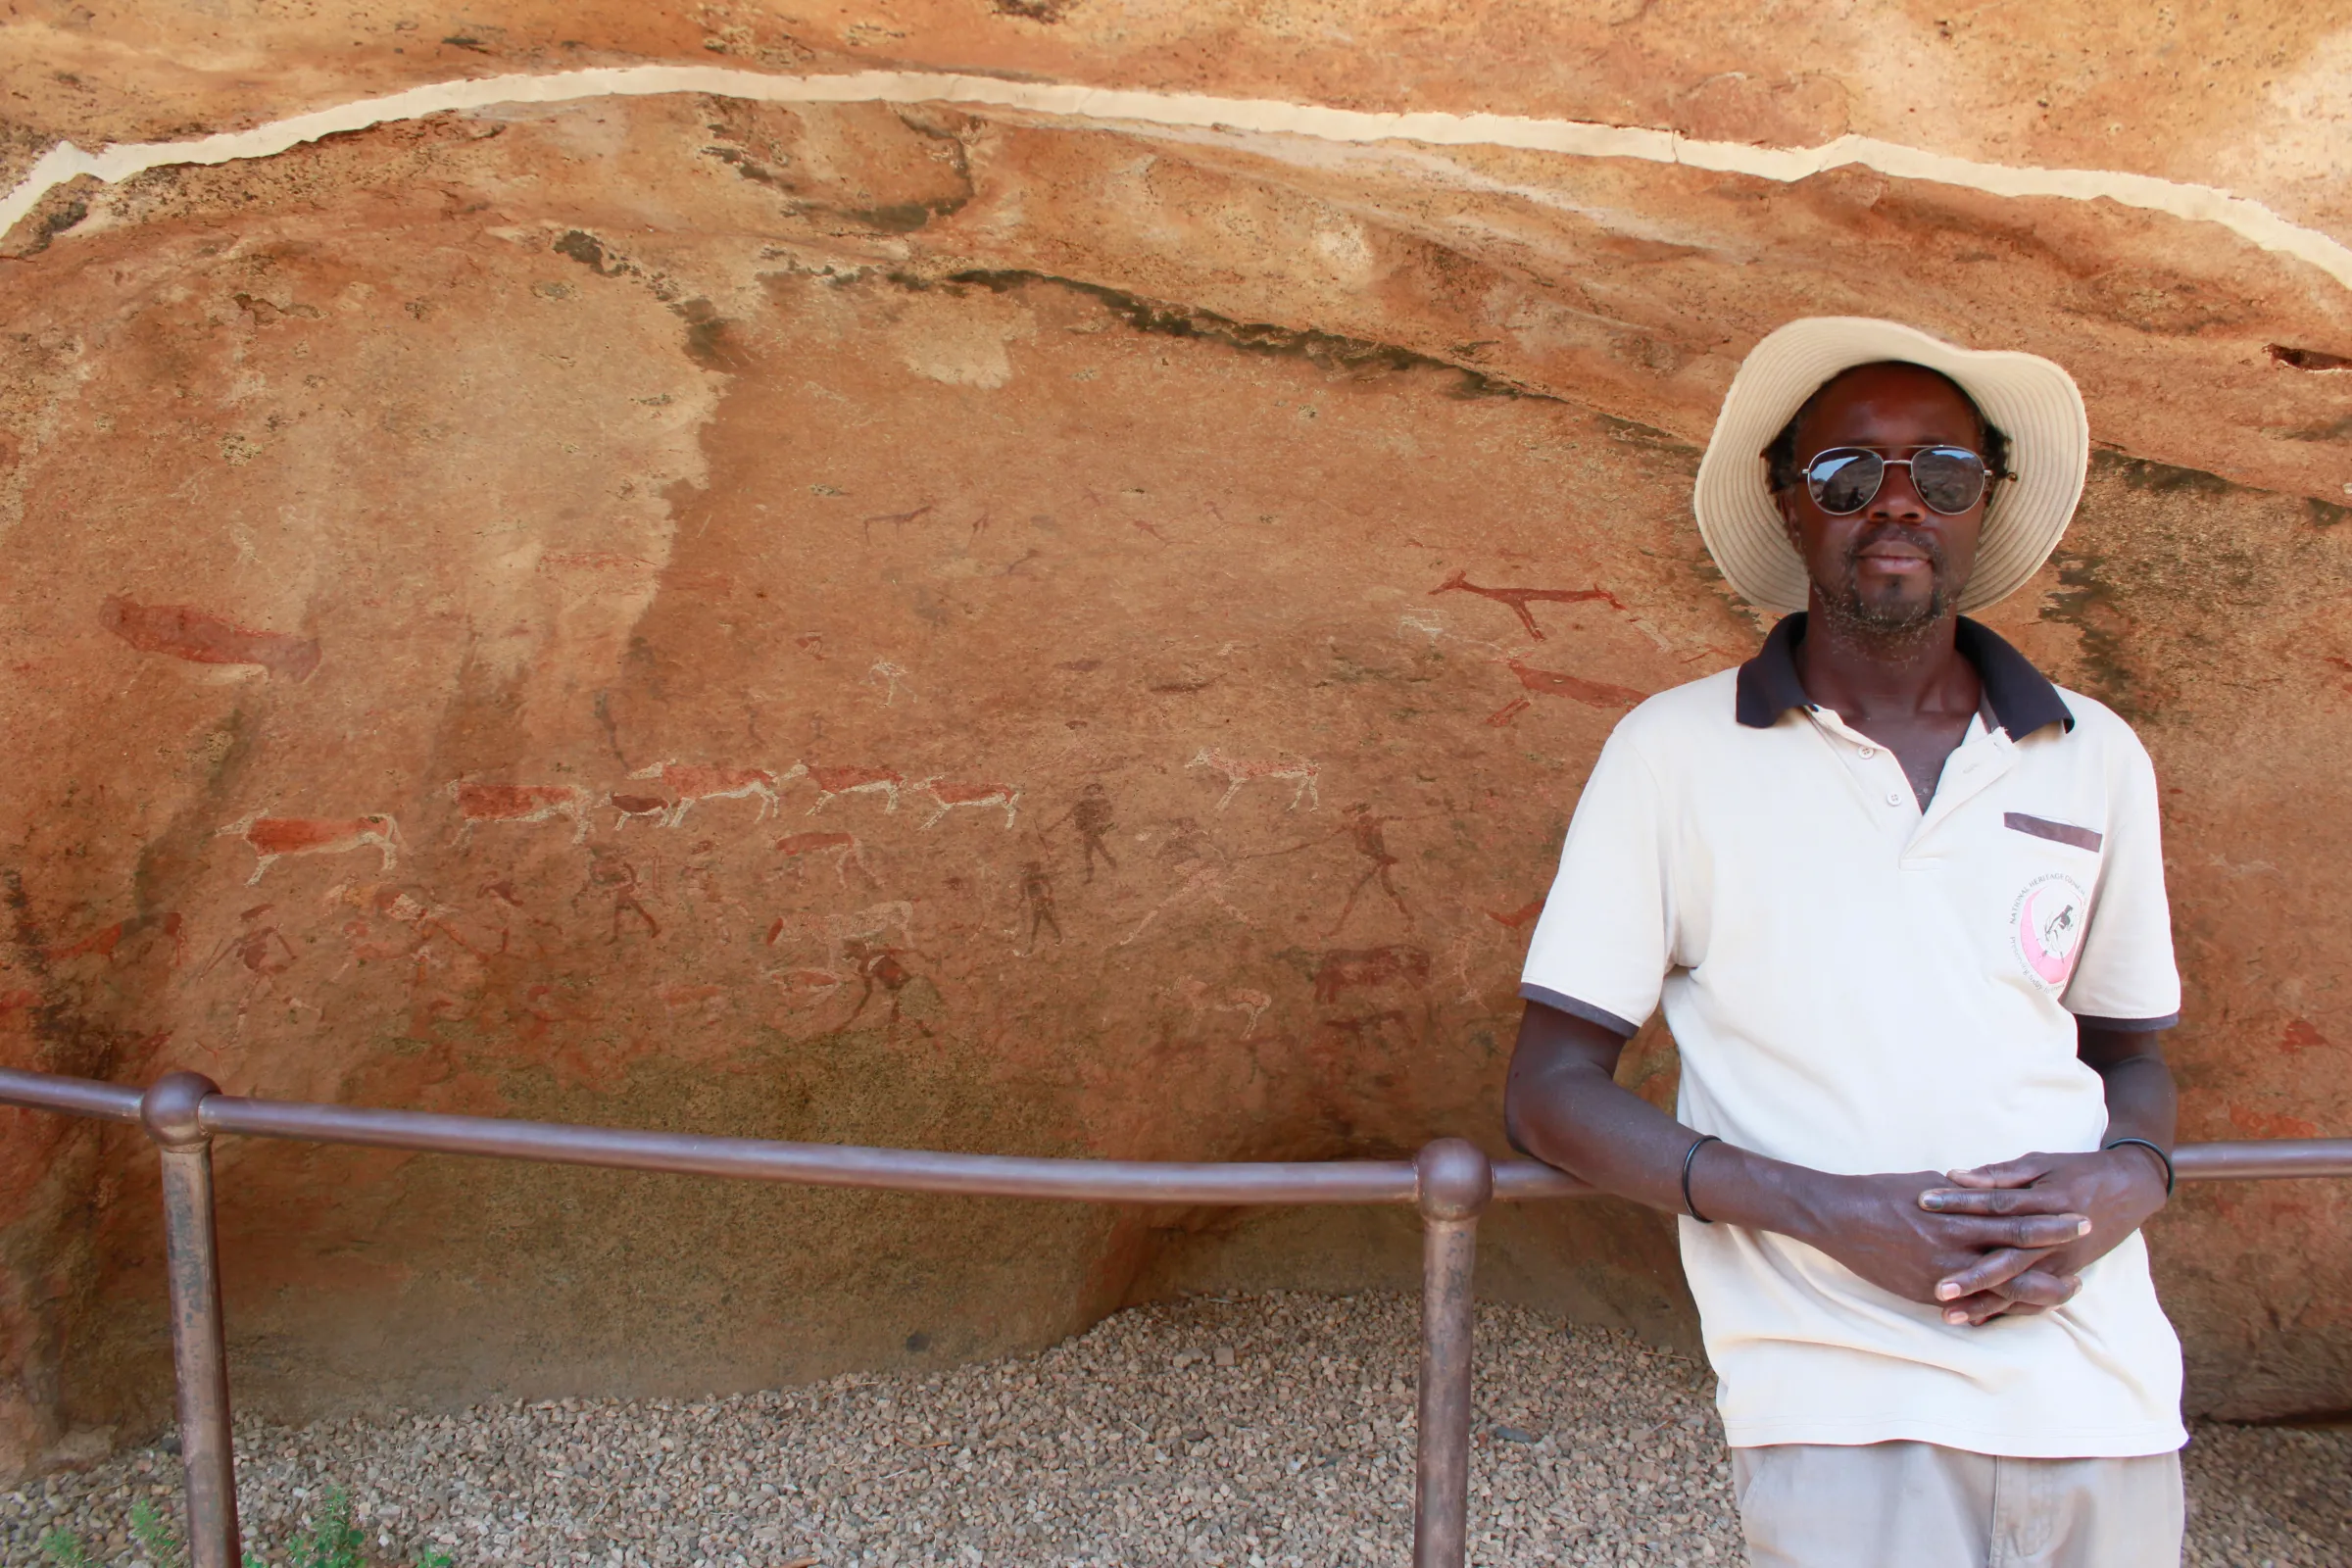 Rock art guide Tertius Oeamseb poses for a photo in front of a railing protecting the White Lady rock art in the Brandberg Mountain in west of Namibia, September 28, 2022